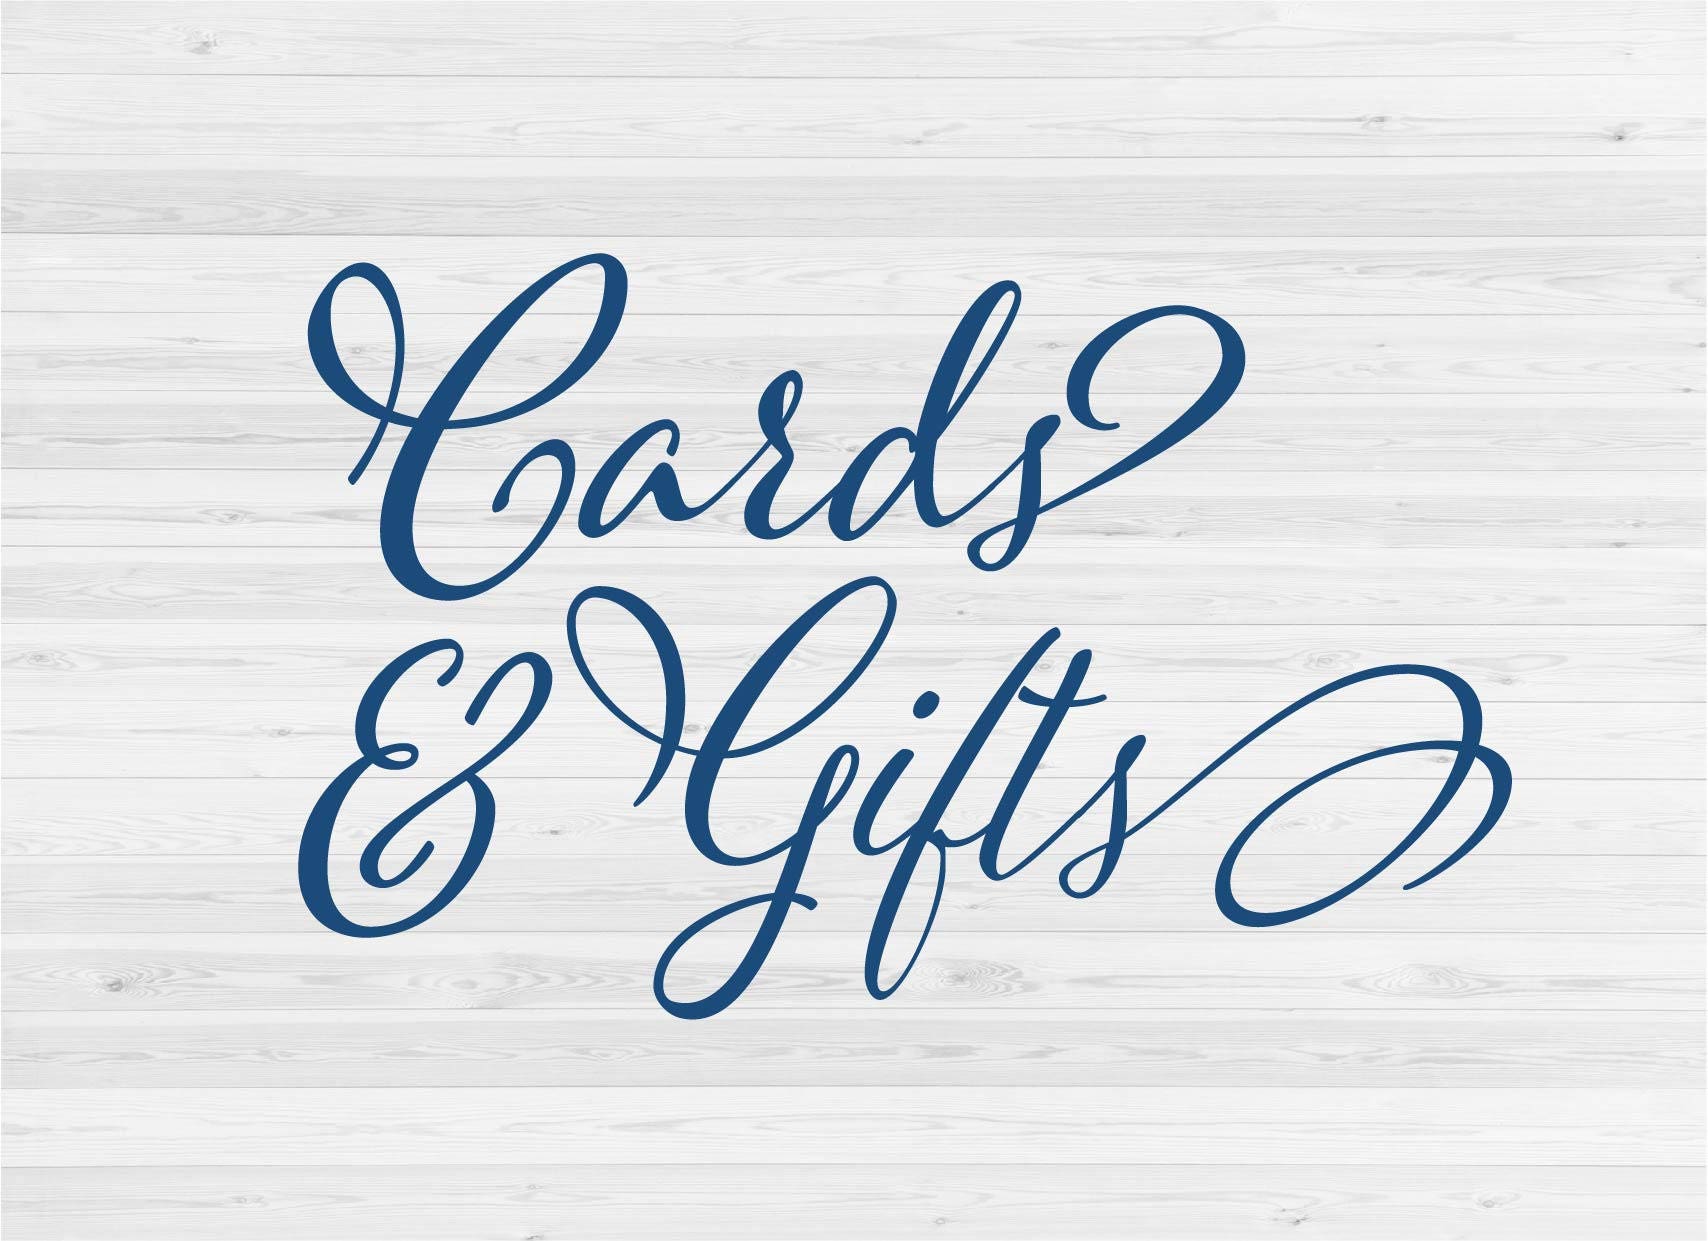 Cards & Gifts-Wedding SVG Cut File